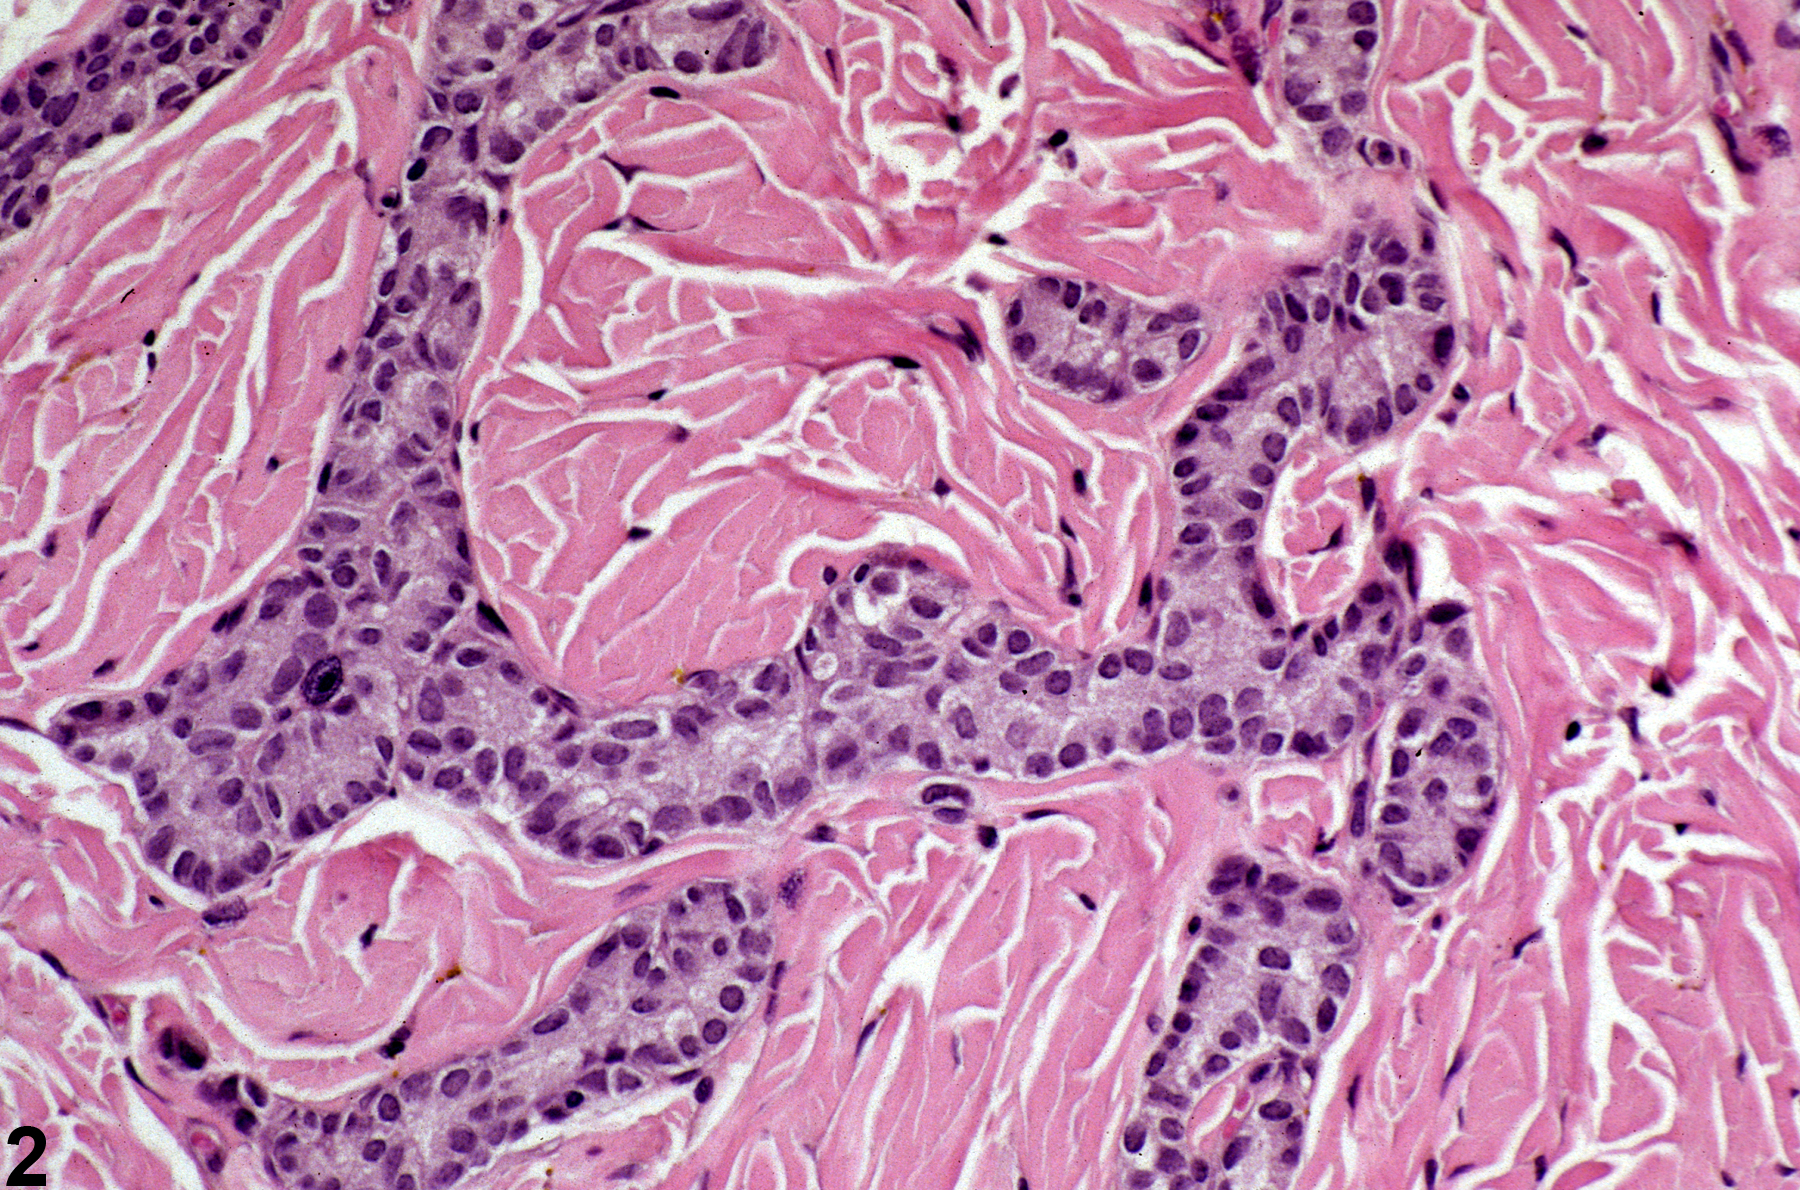 Image of fibrosis in the parathyroid gland from a female F344/N rat in a chronic study